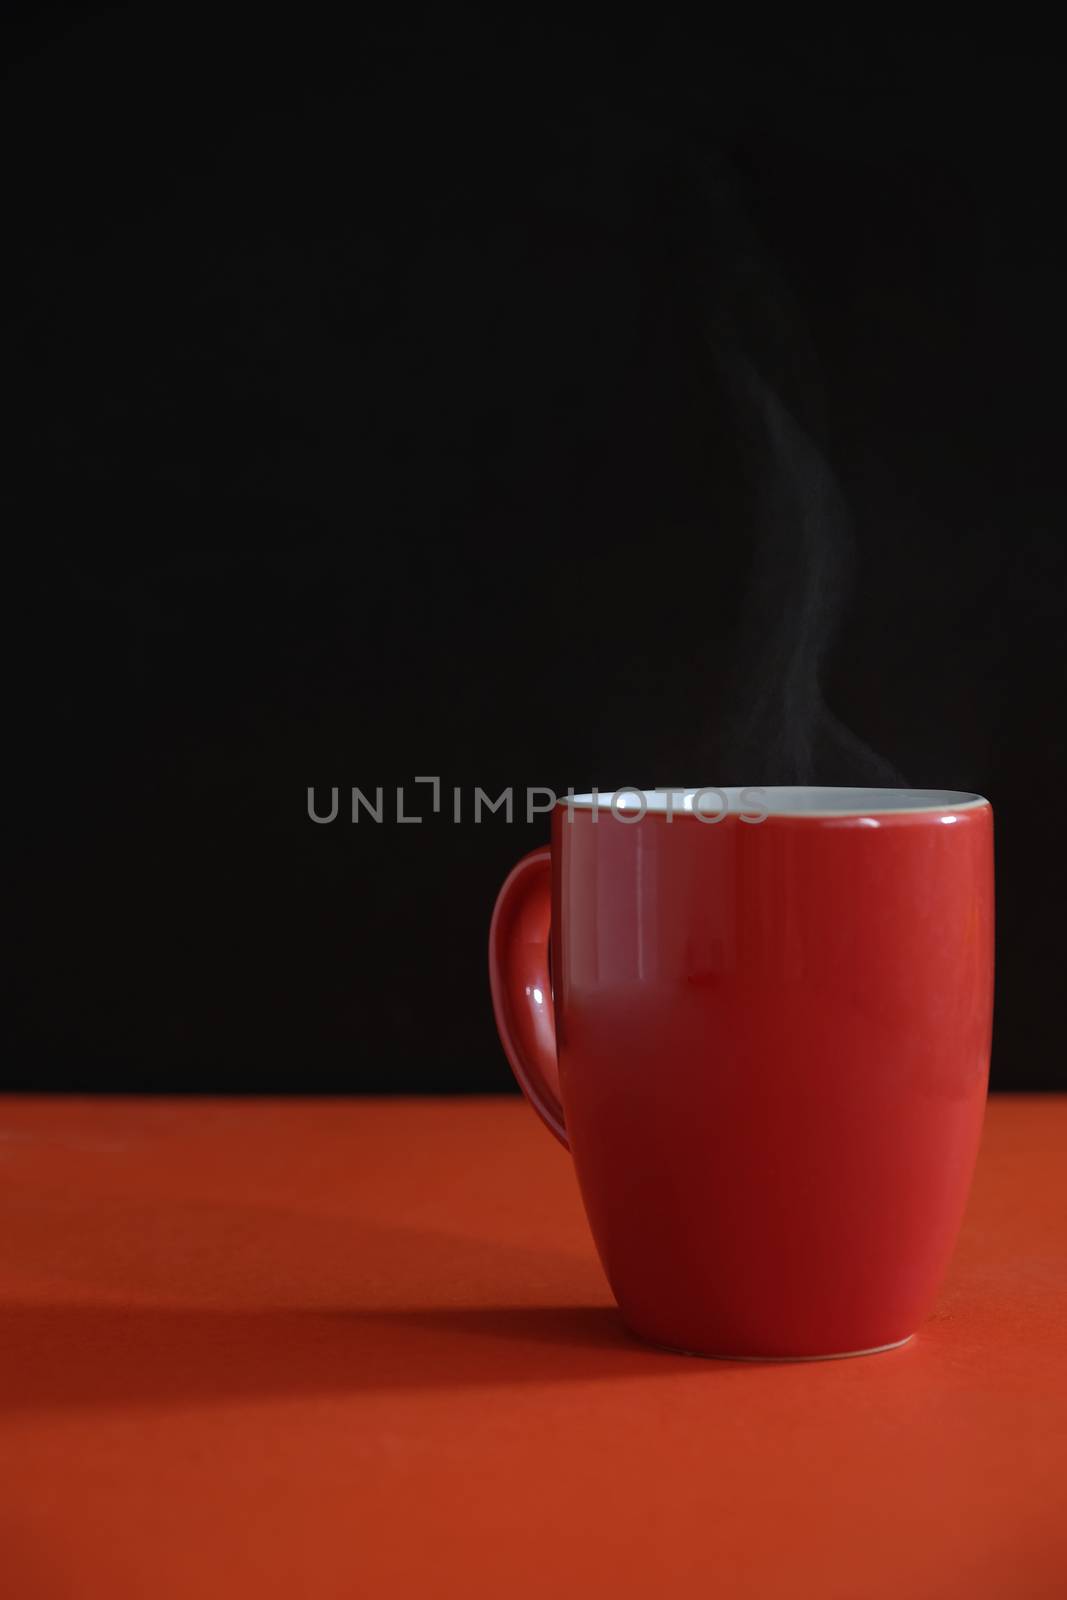 an orange mug with steamy hot coffee on an orange table top with dark background